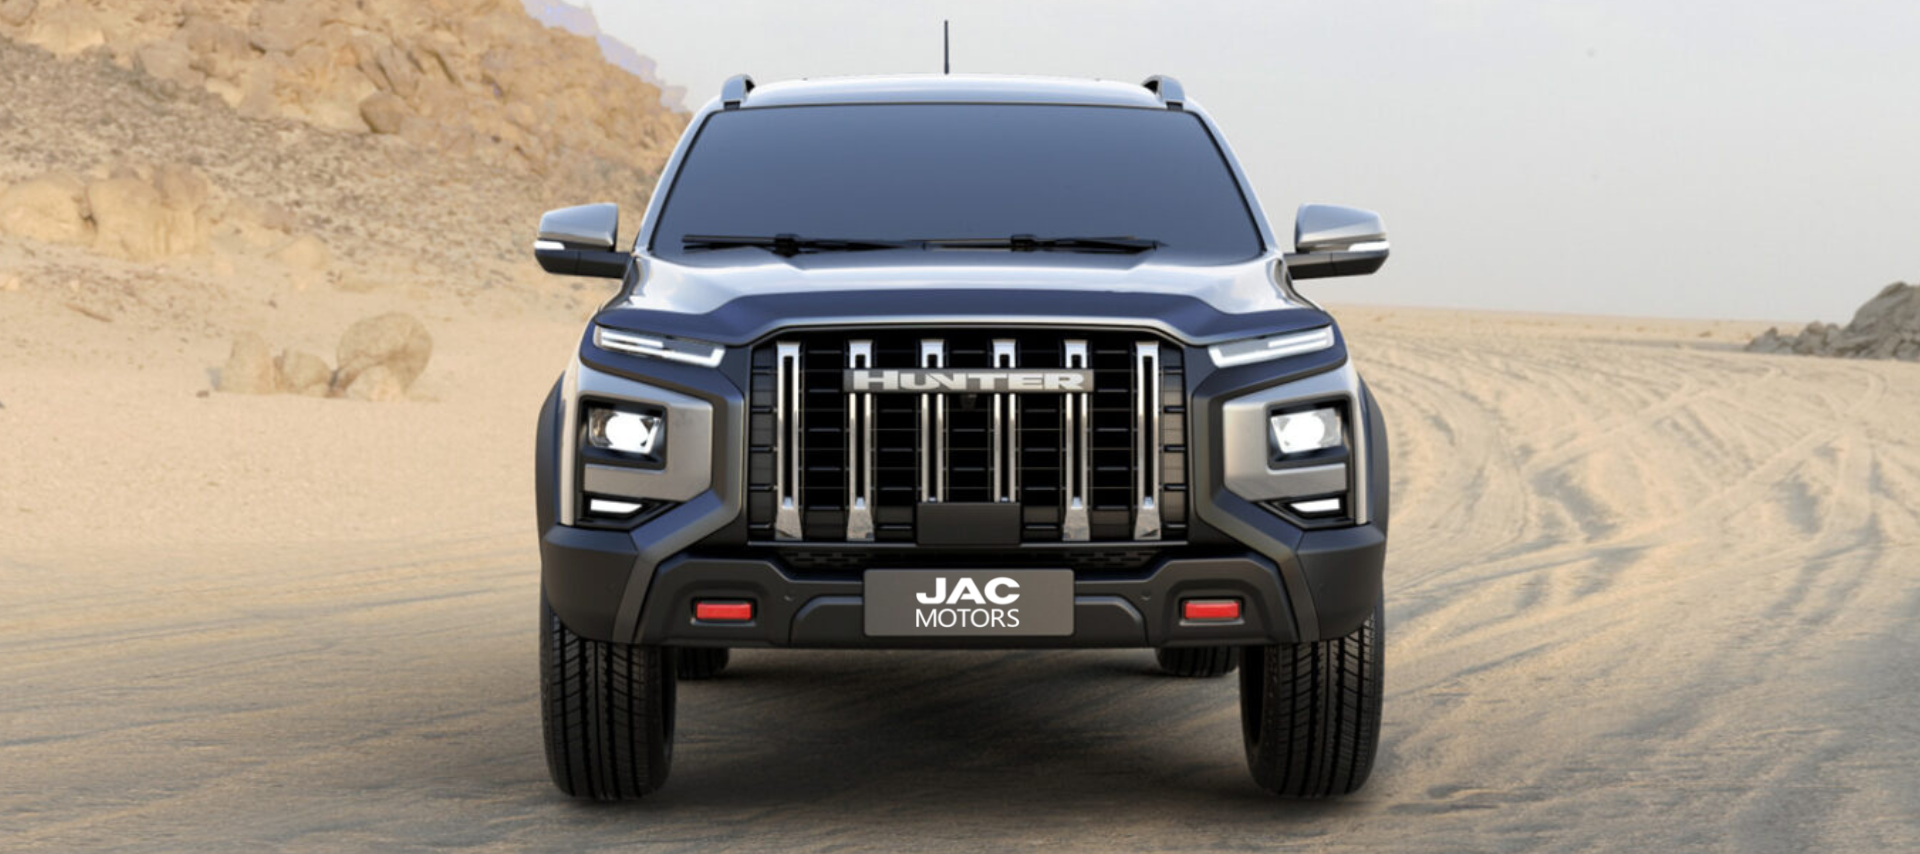 JAC Motors To Launch New Bakkie ‘T9 Hunter’ In South Africa In 2023